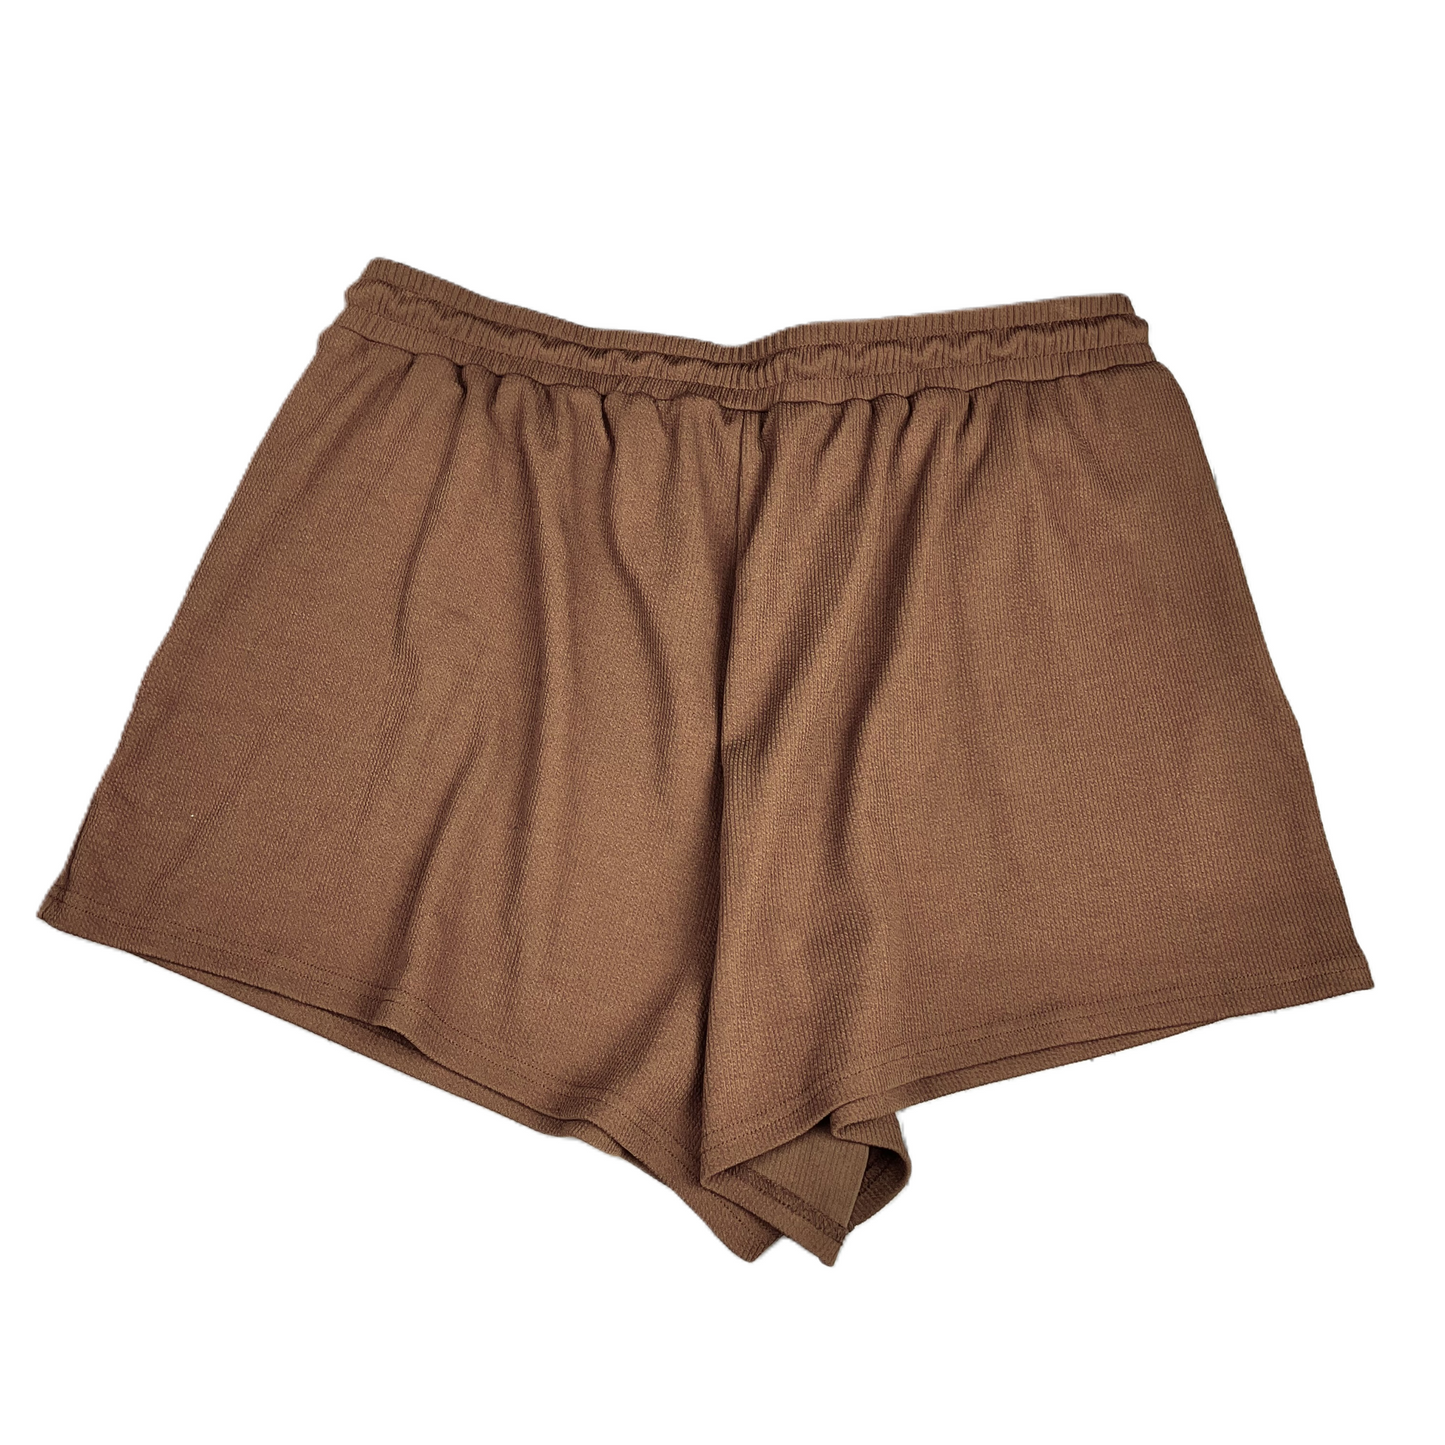 Brown Shorts By Shein, Size: 3x